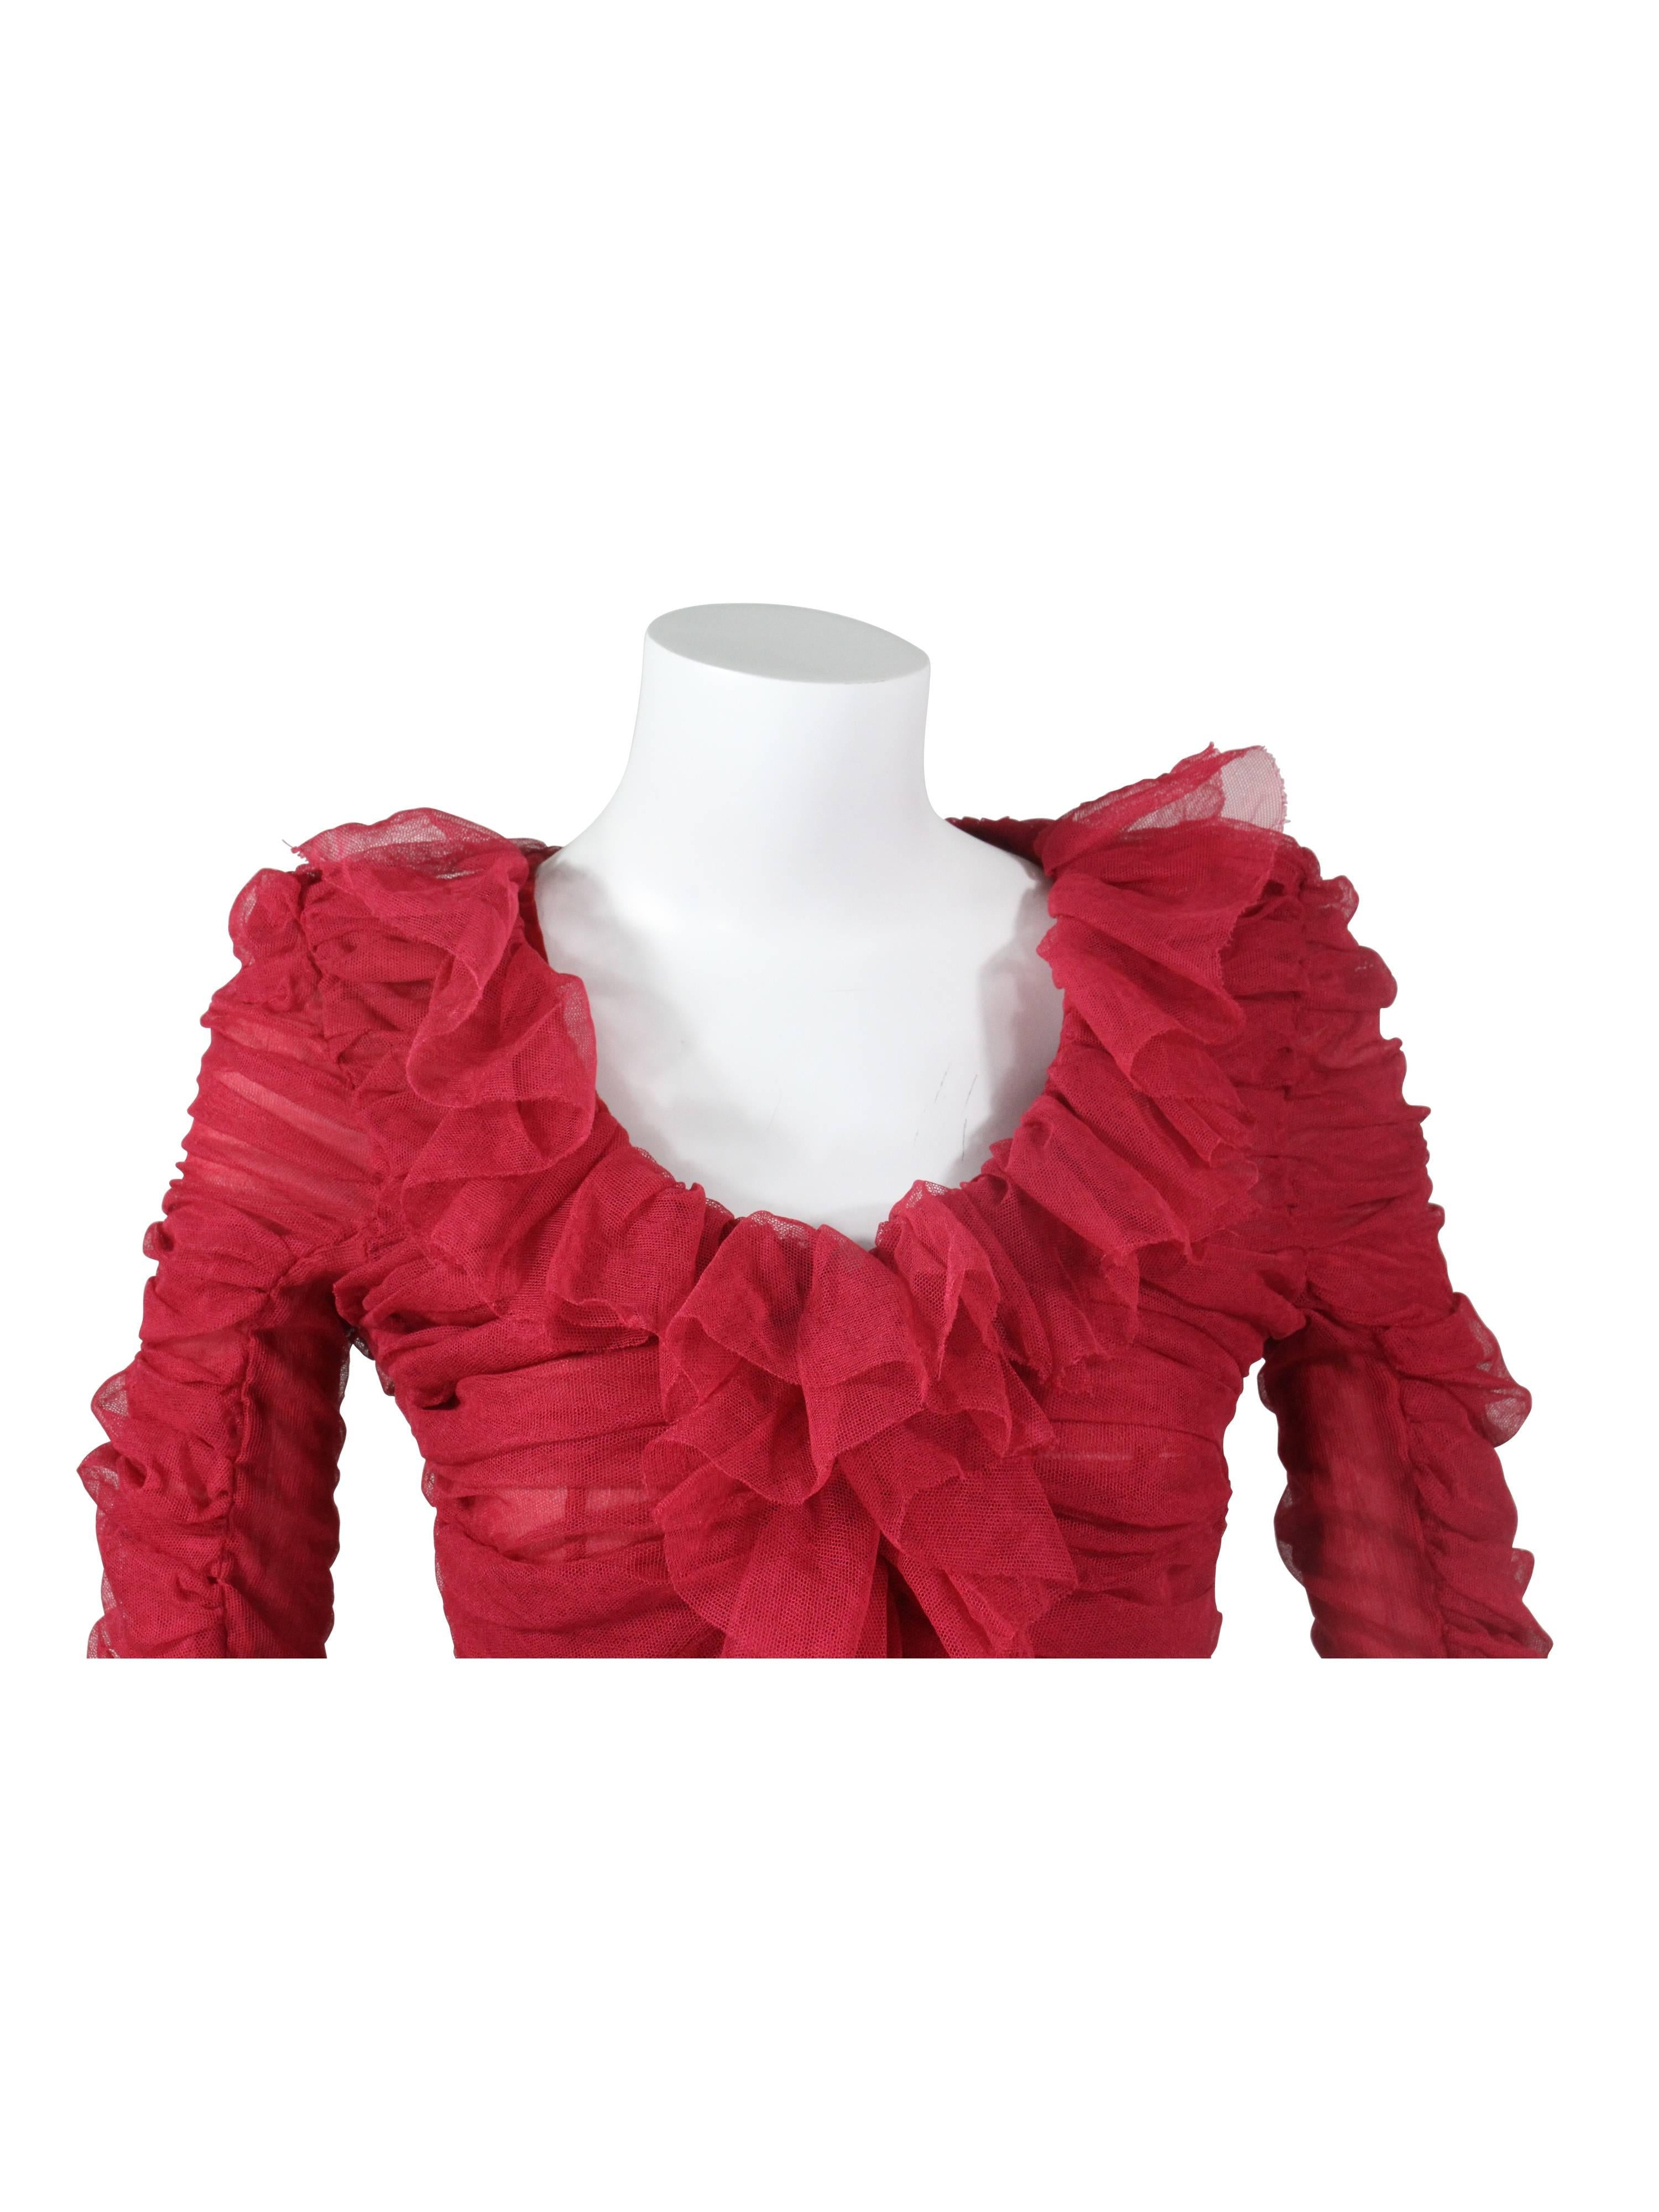 Tom Ford for Yves Saint Laurent Red Ruched Ruffled Silk Top Blouse In Excellent Condition In Boca Raton, FL